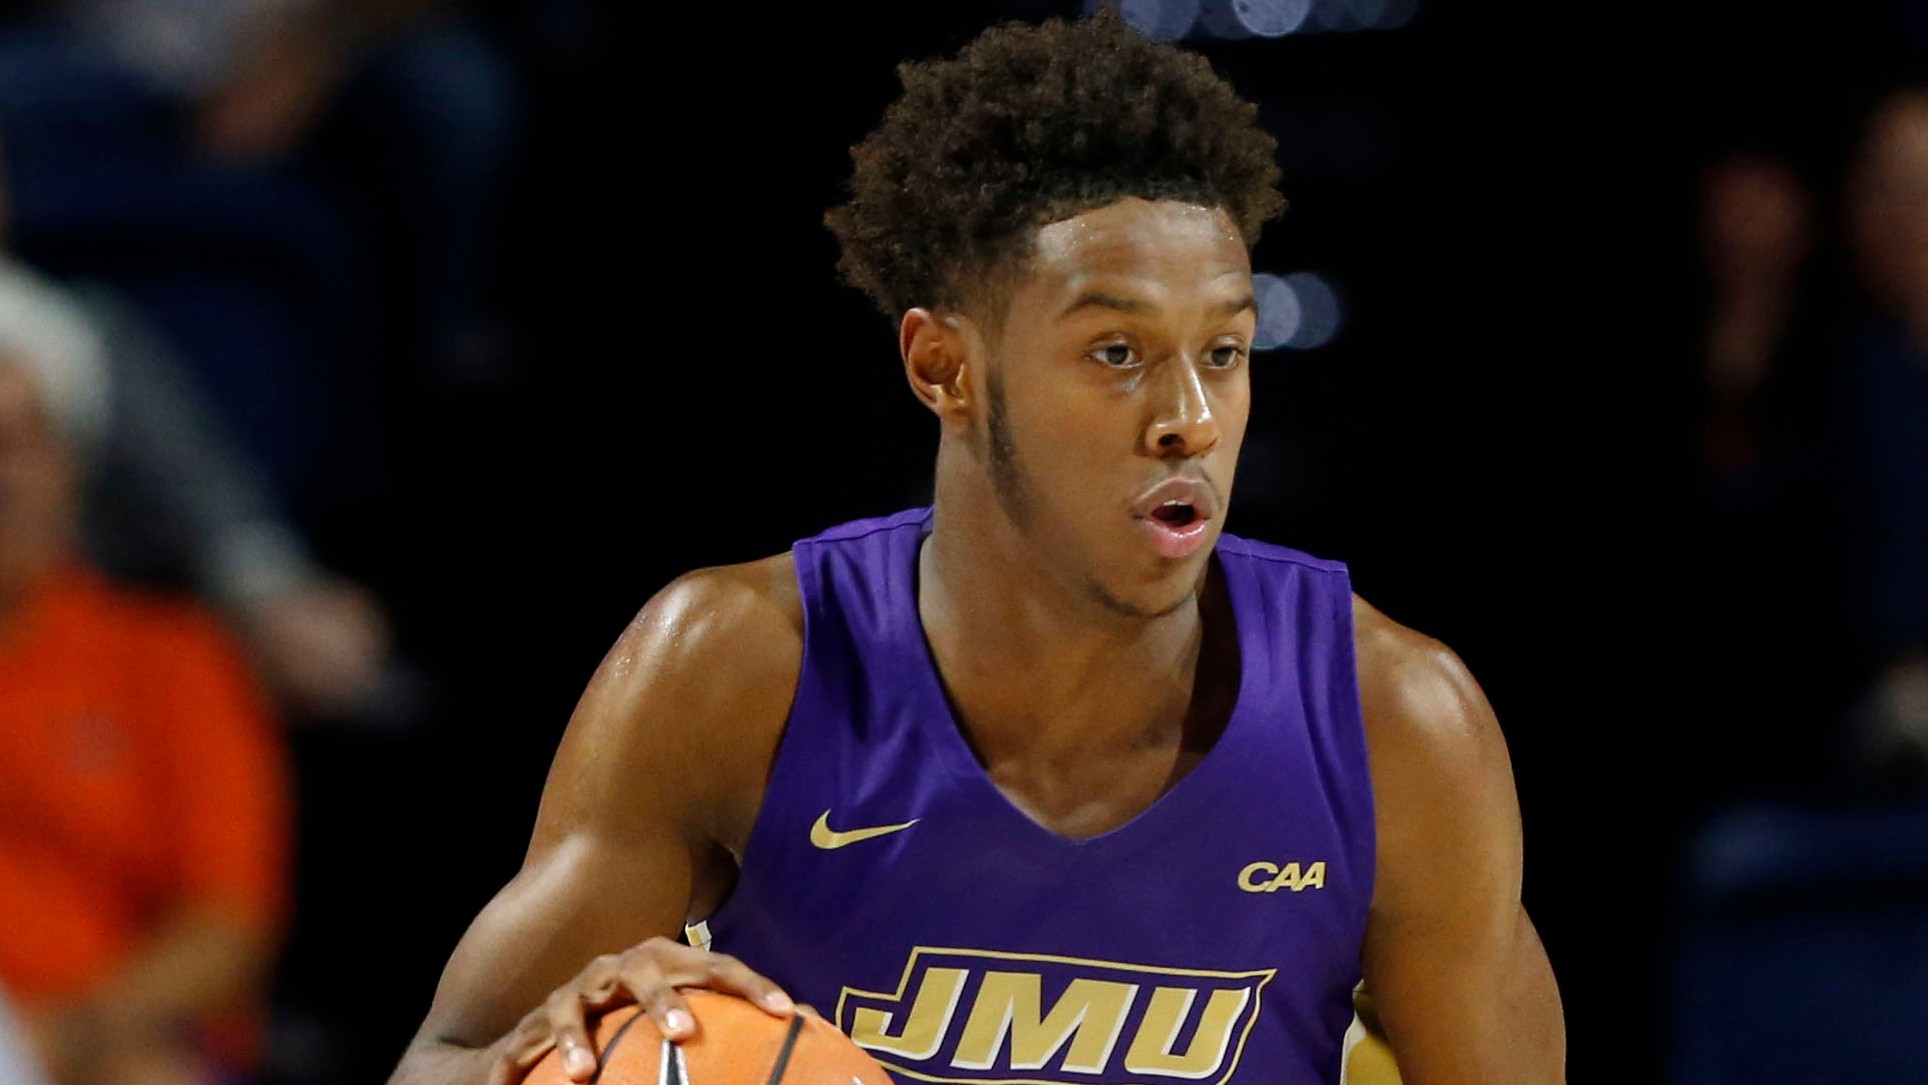 Maryland MBB to Play JMU for Only Second Time Ever After Schedule Change